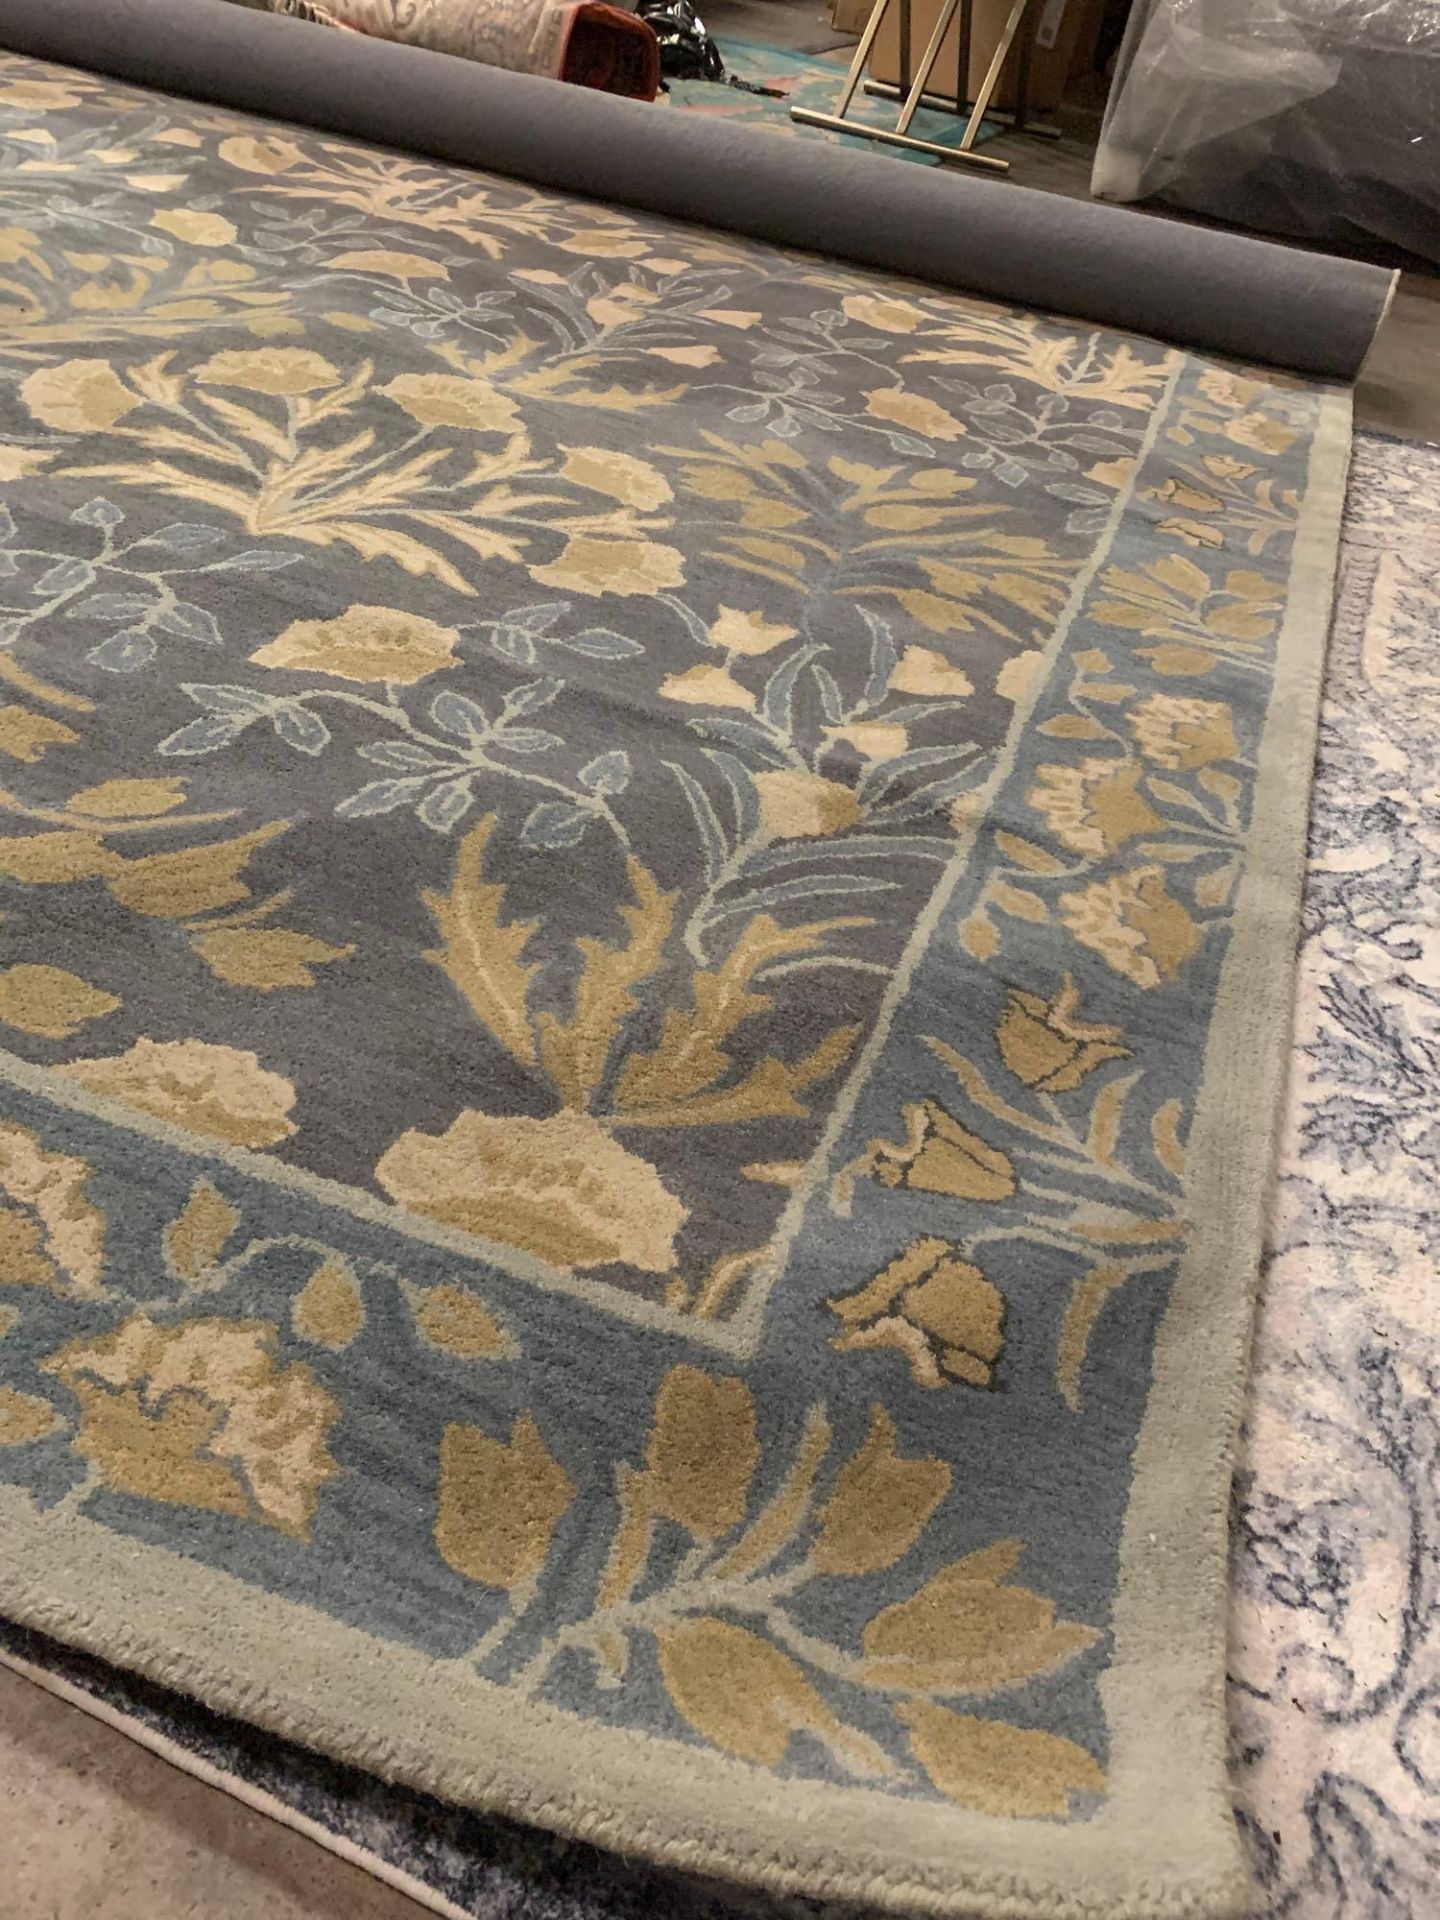 Nain Floral Ziegler blue area rug hand tufted high quality wool Made Of 100% Wool Pile Ziegler - Bild 4 aus 8